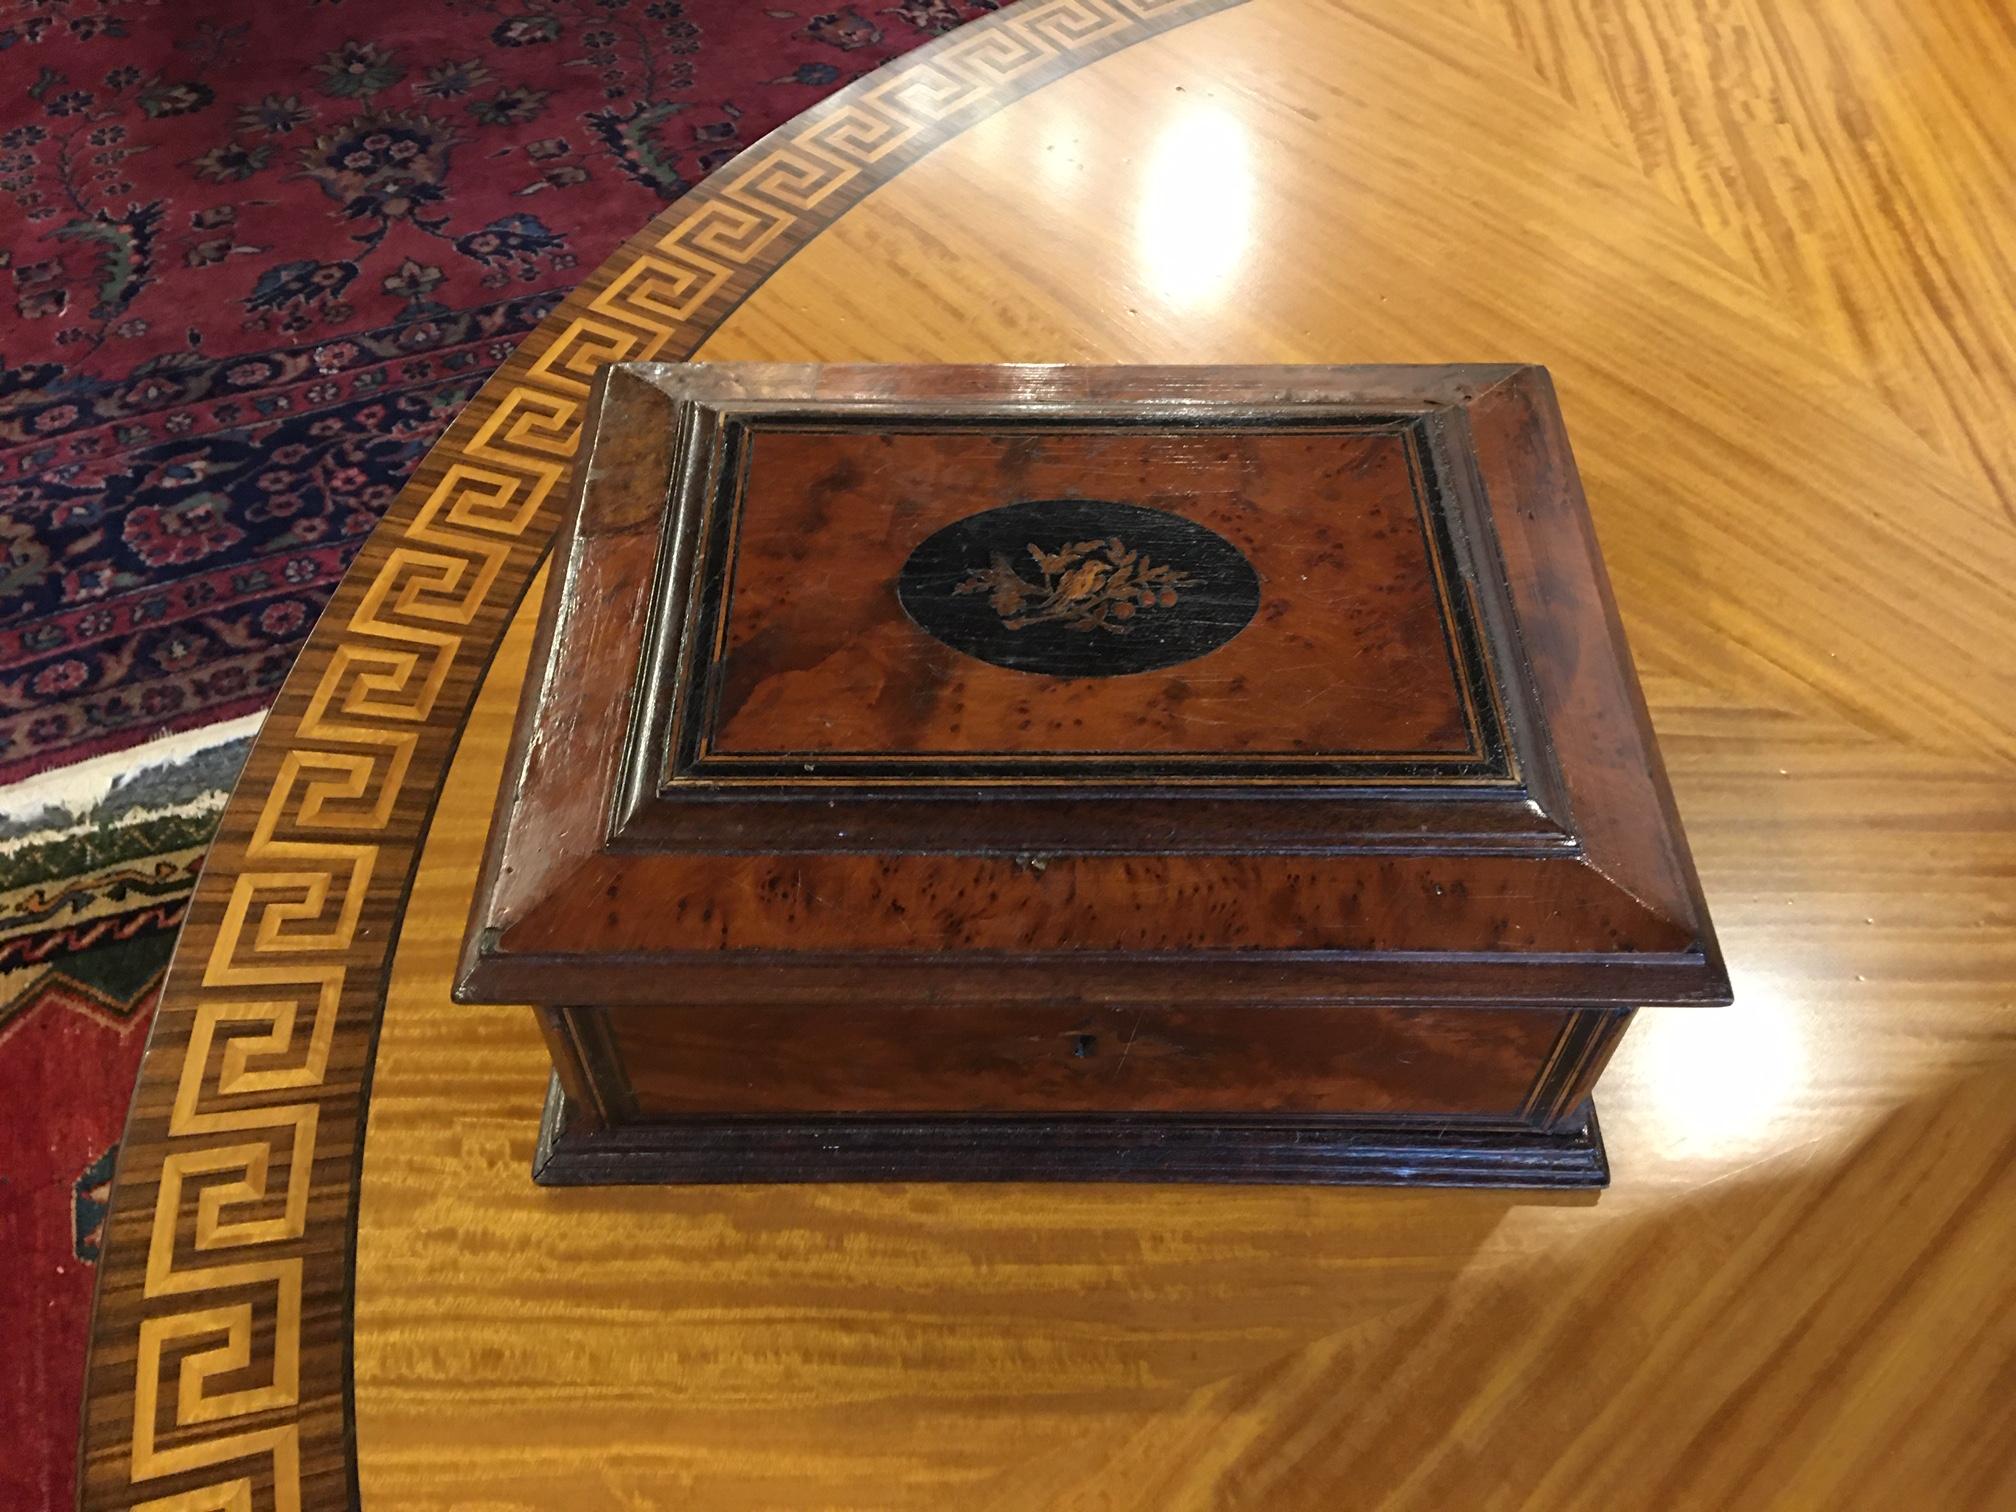 French burl walnut and inlay jewelry box, 19th century. Decorative inlay with a bird and flowers design.